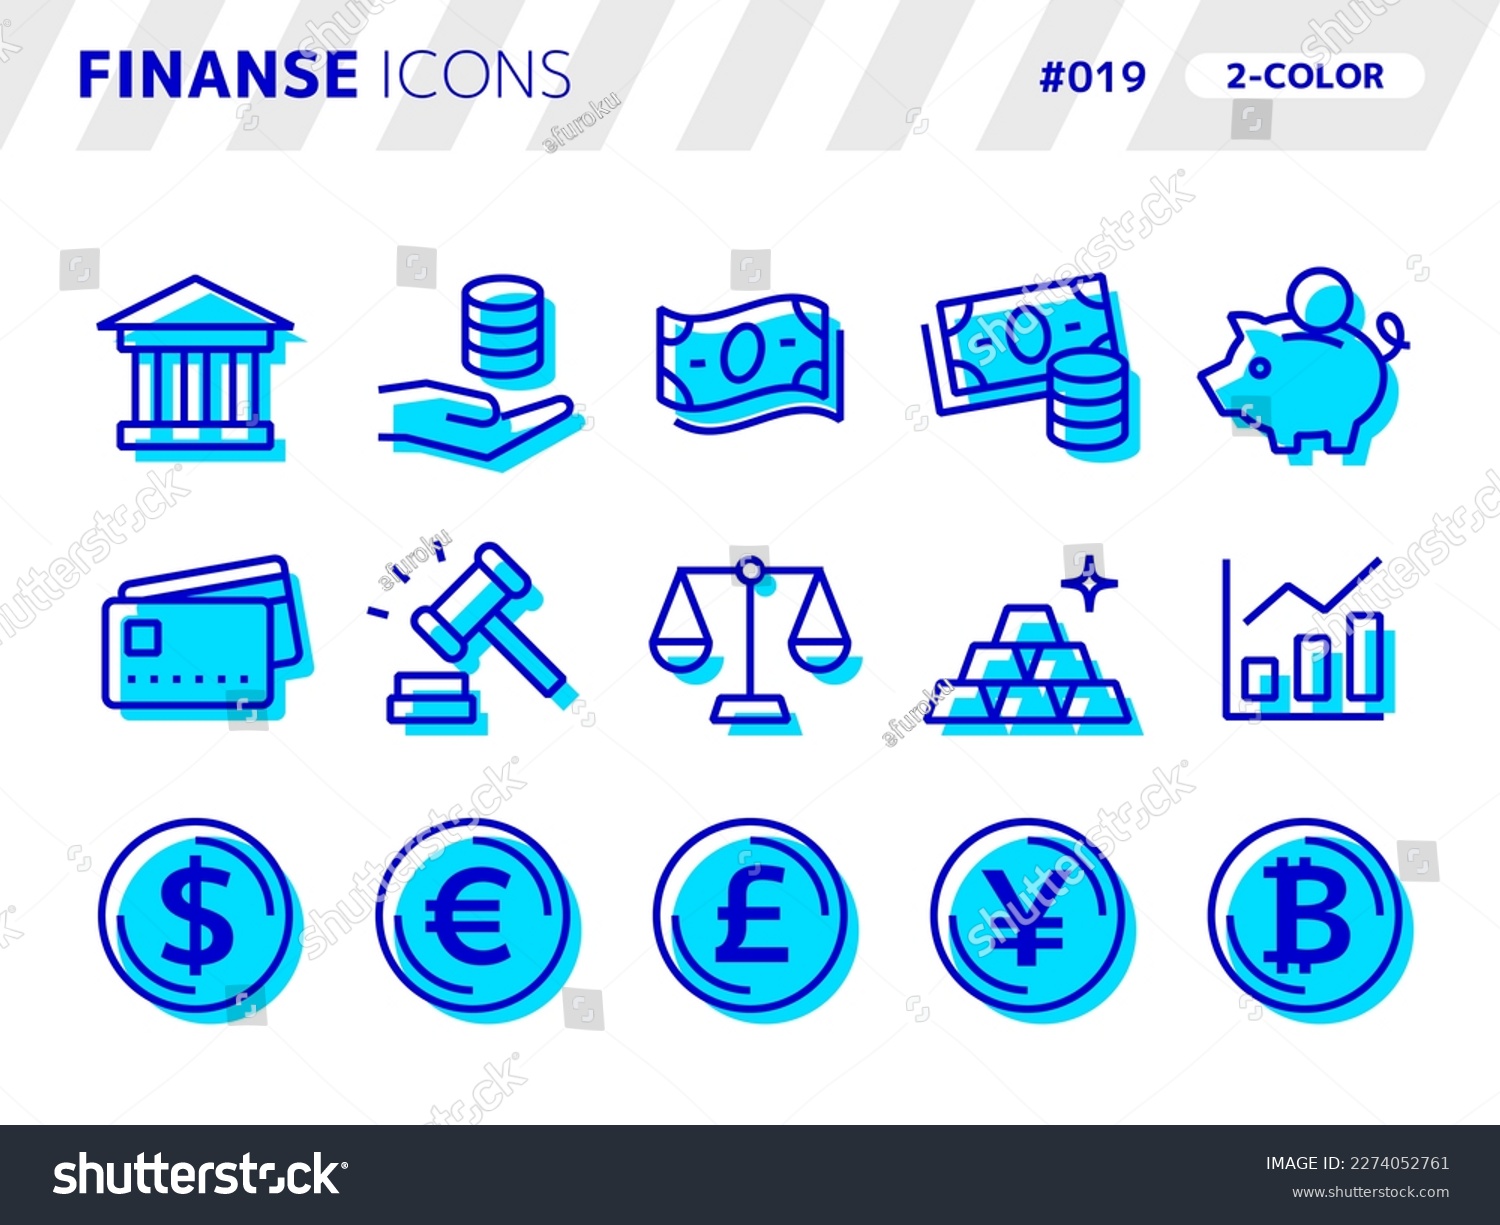 SVG of 2-color style icon set related to finance_019 svg